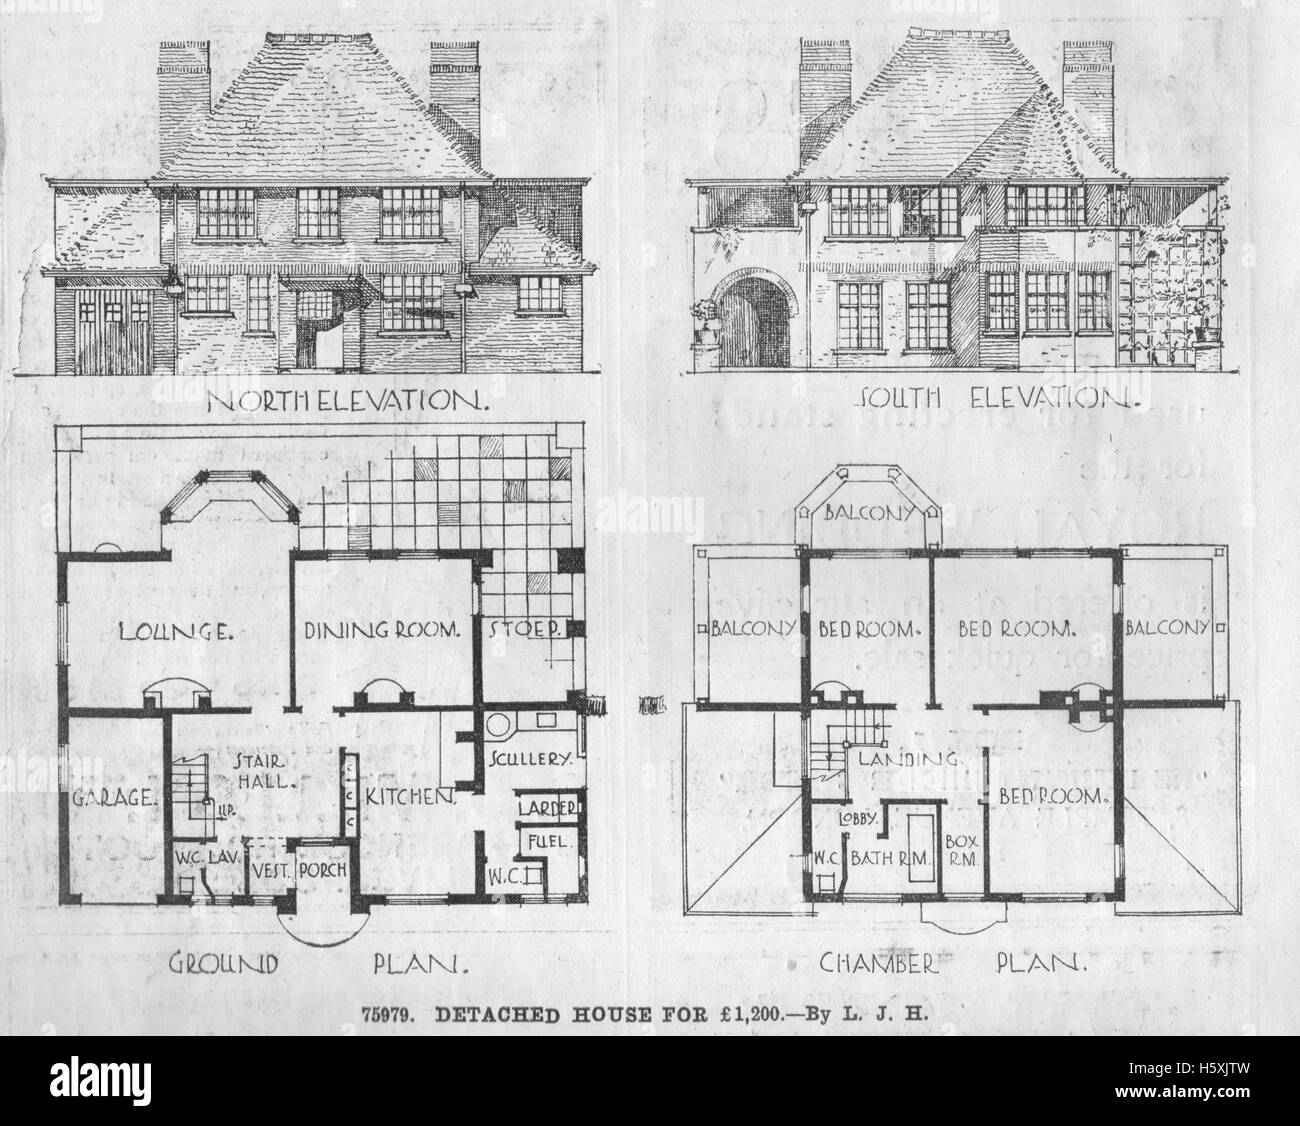 Vintage floor plan for a detached house costing £1200 in the Illustrated Carpenter and Builder magazine dated December 20th 1935 Stock Photo